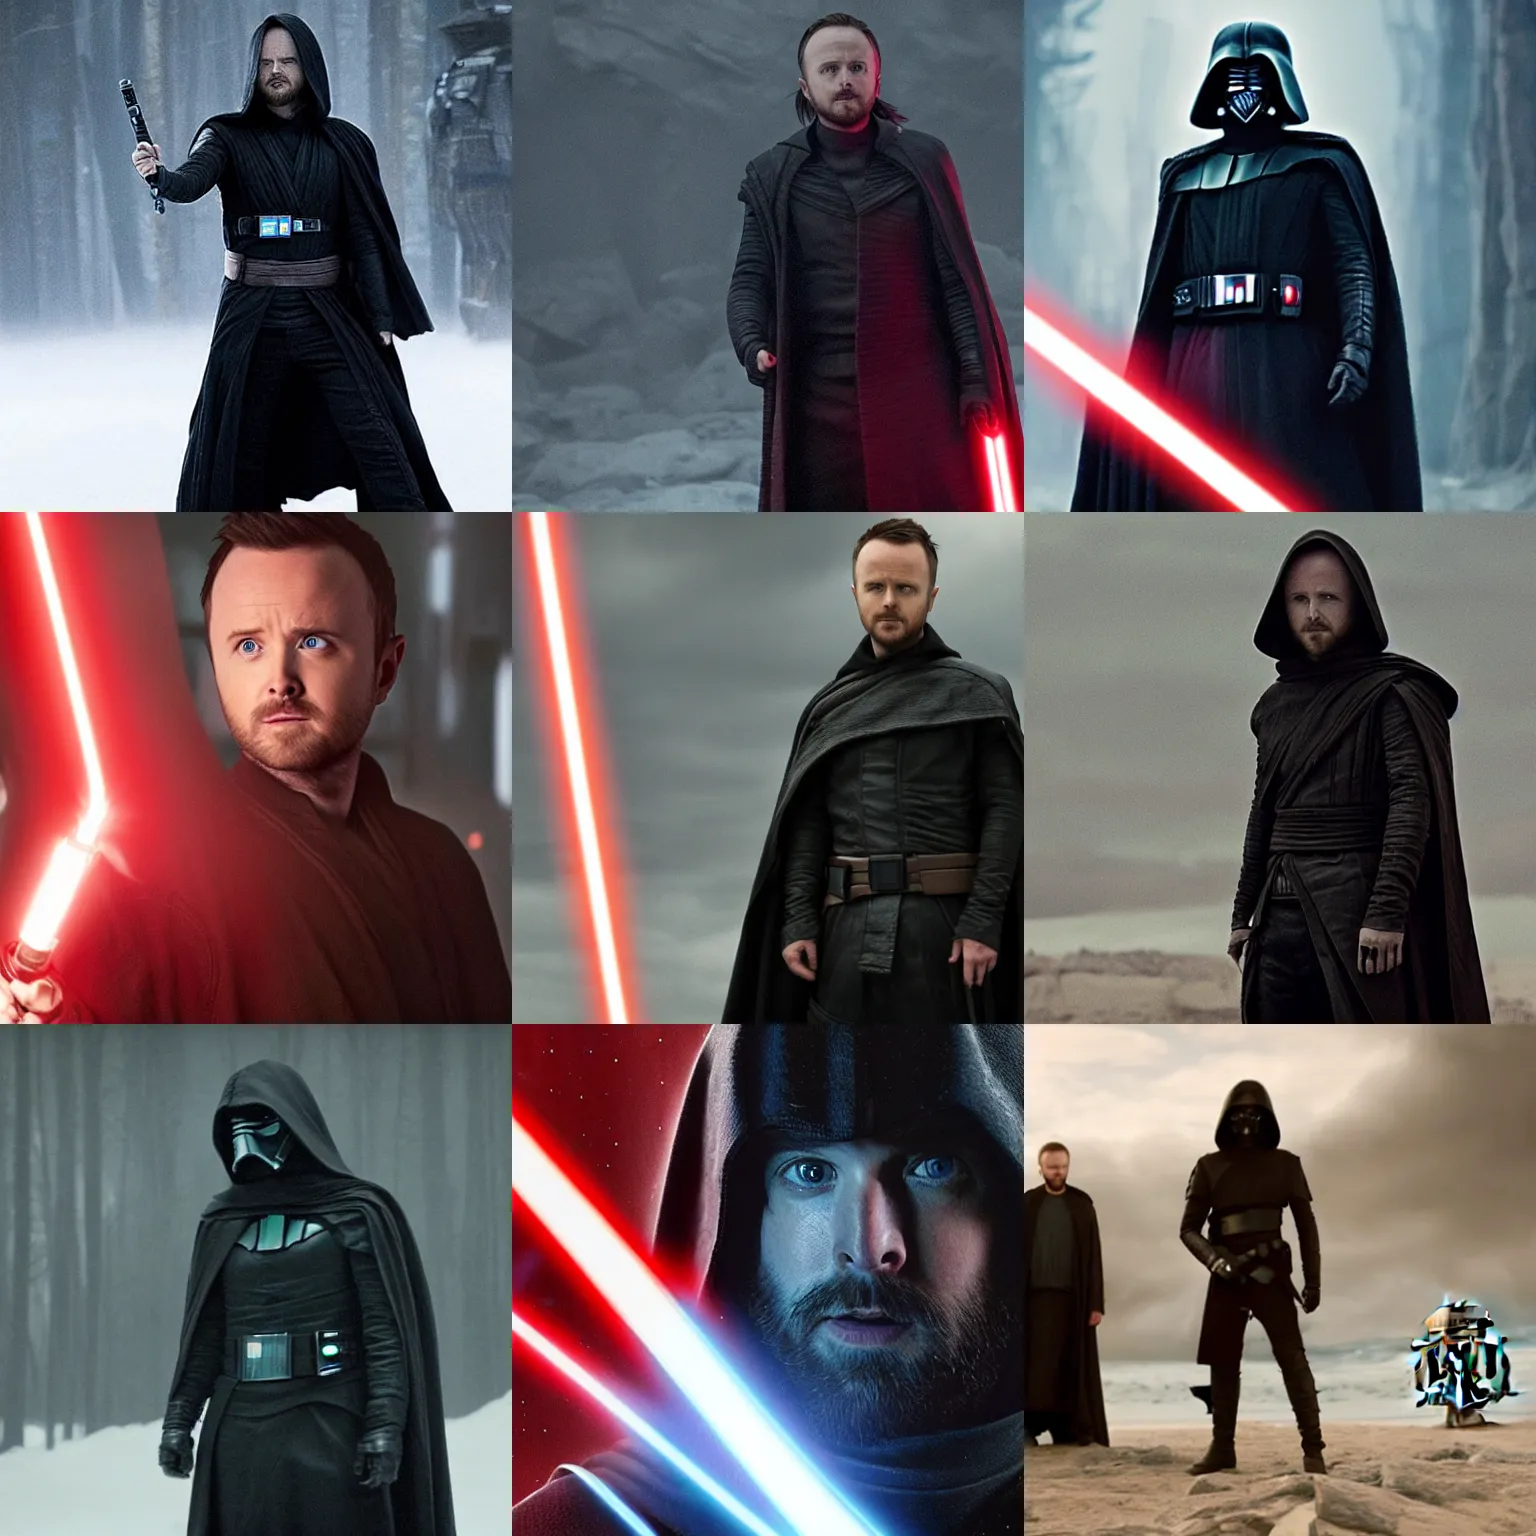 Prompt: aaron paul in Star Wars - The Last Jedi as Kylo Ren without a helmet holding his lightsaber